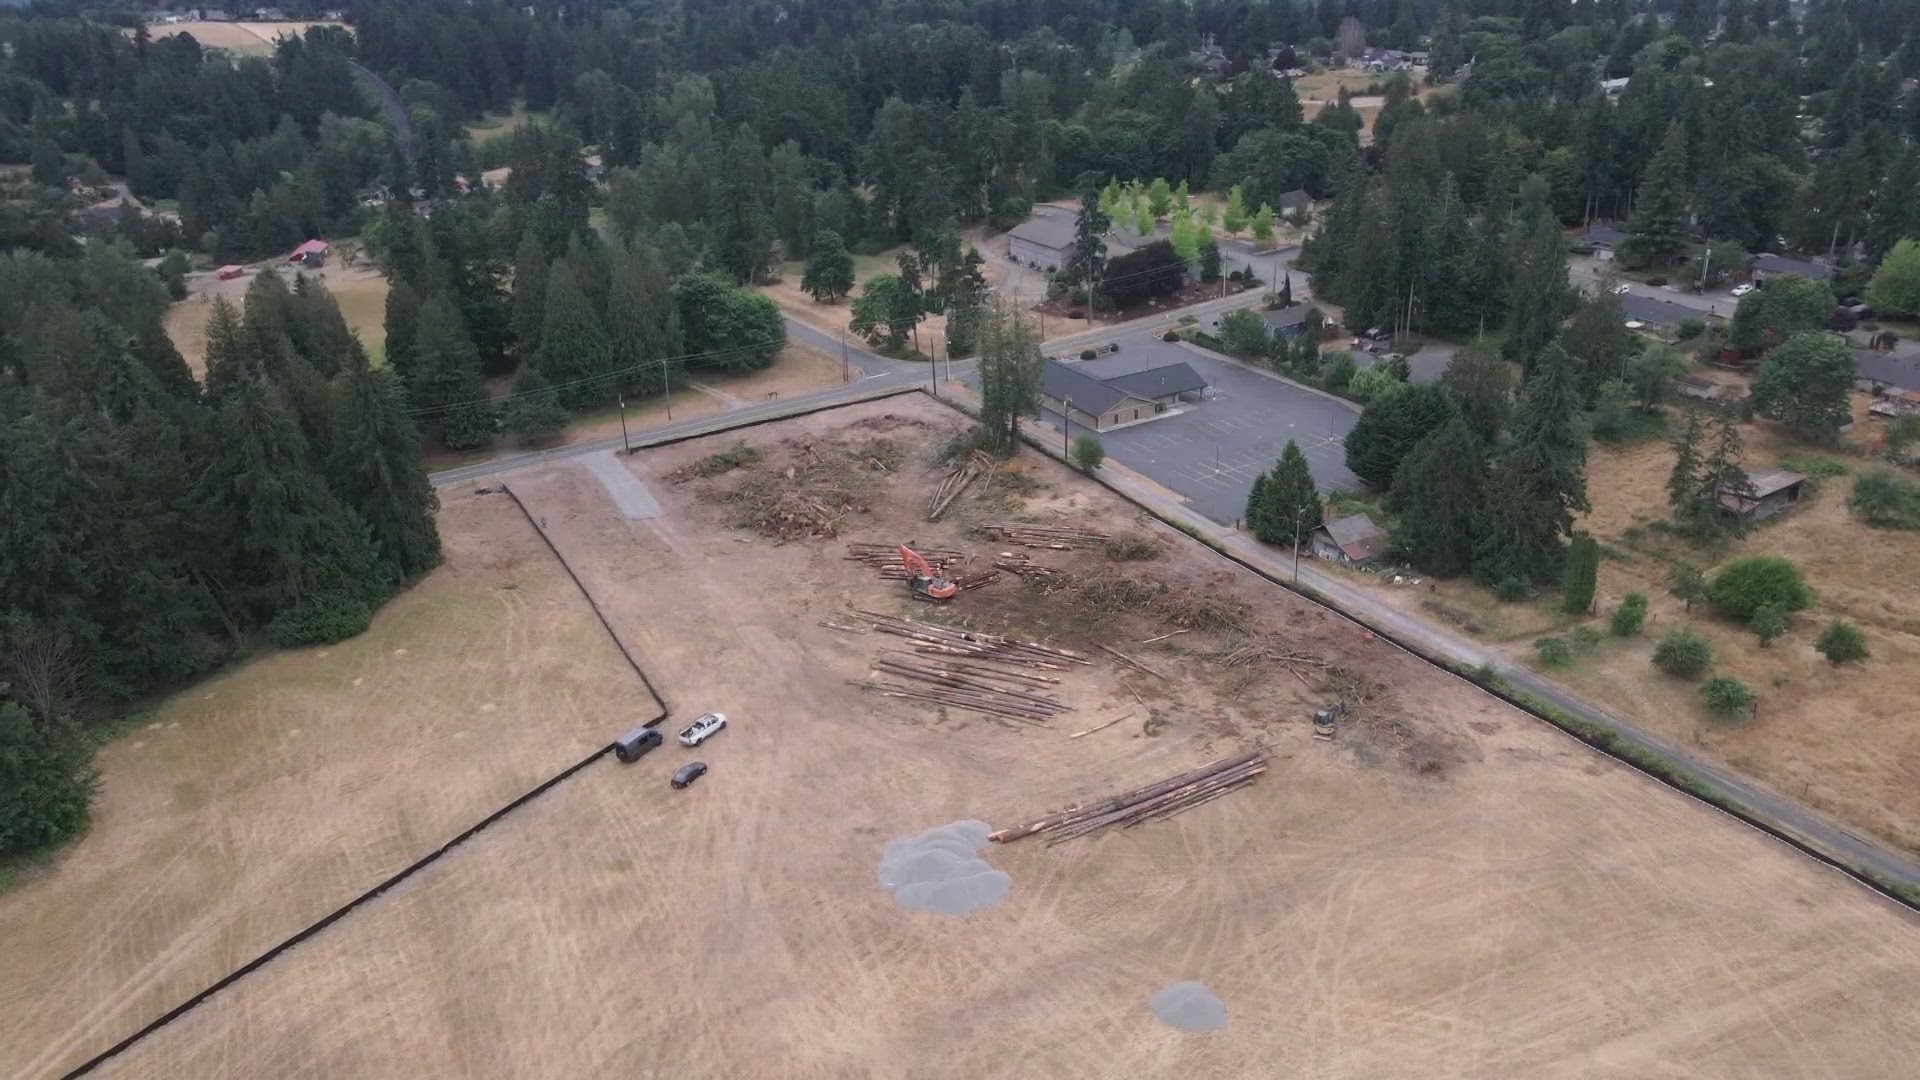 Construction on a Megachurch has begun in Milton. KING 5 has learned that tribal concerns voiced to the city were overlooked, breaking typical treaty rights.